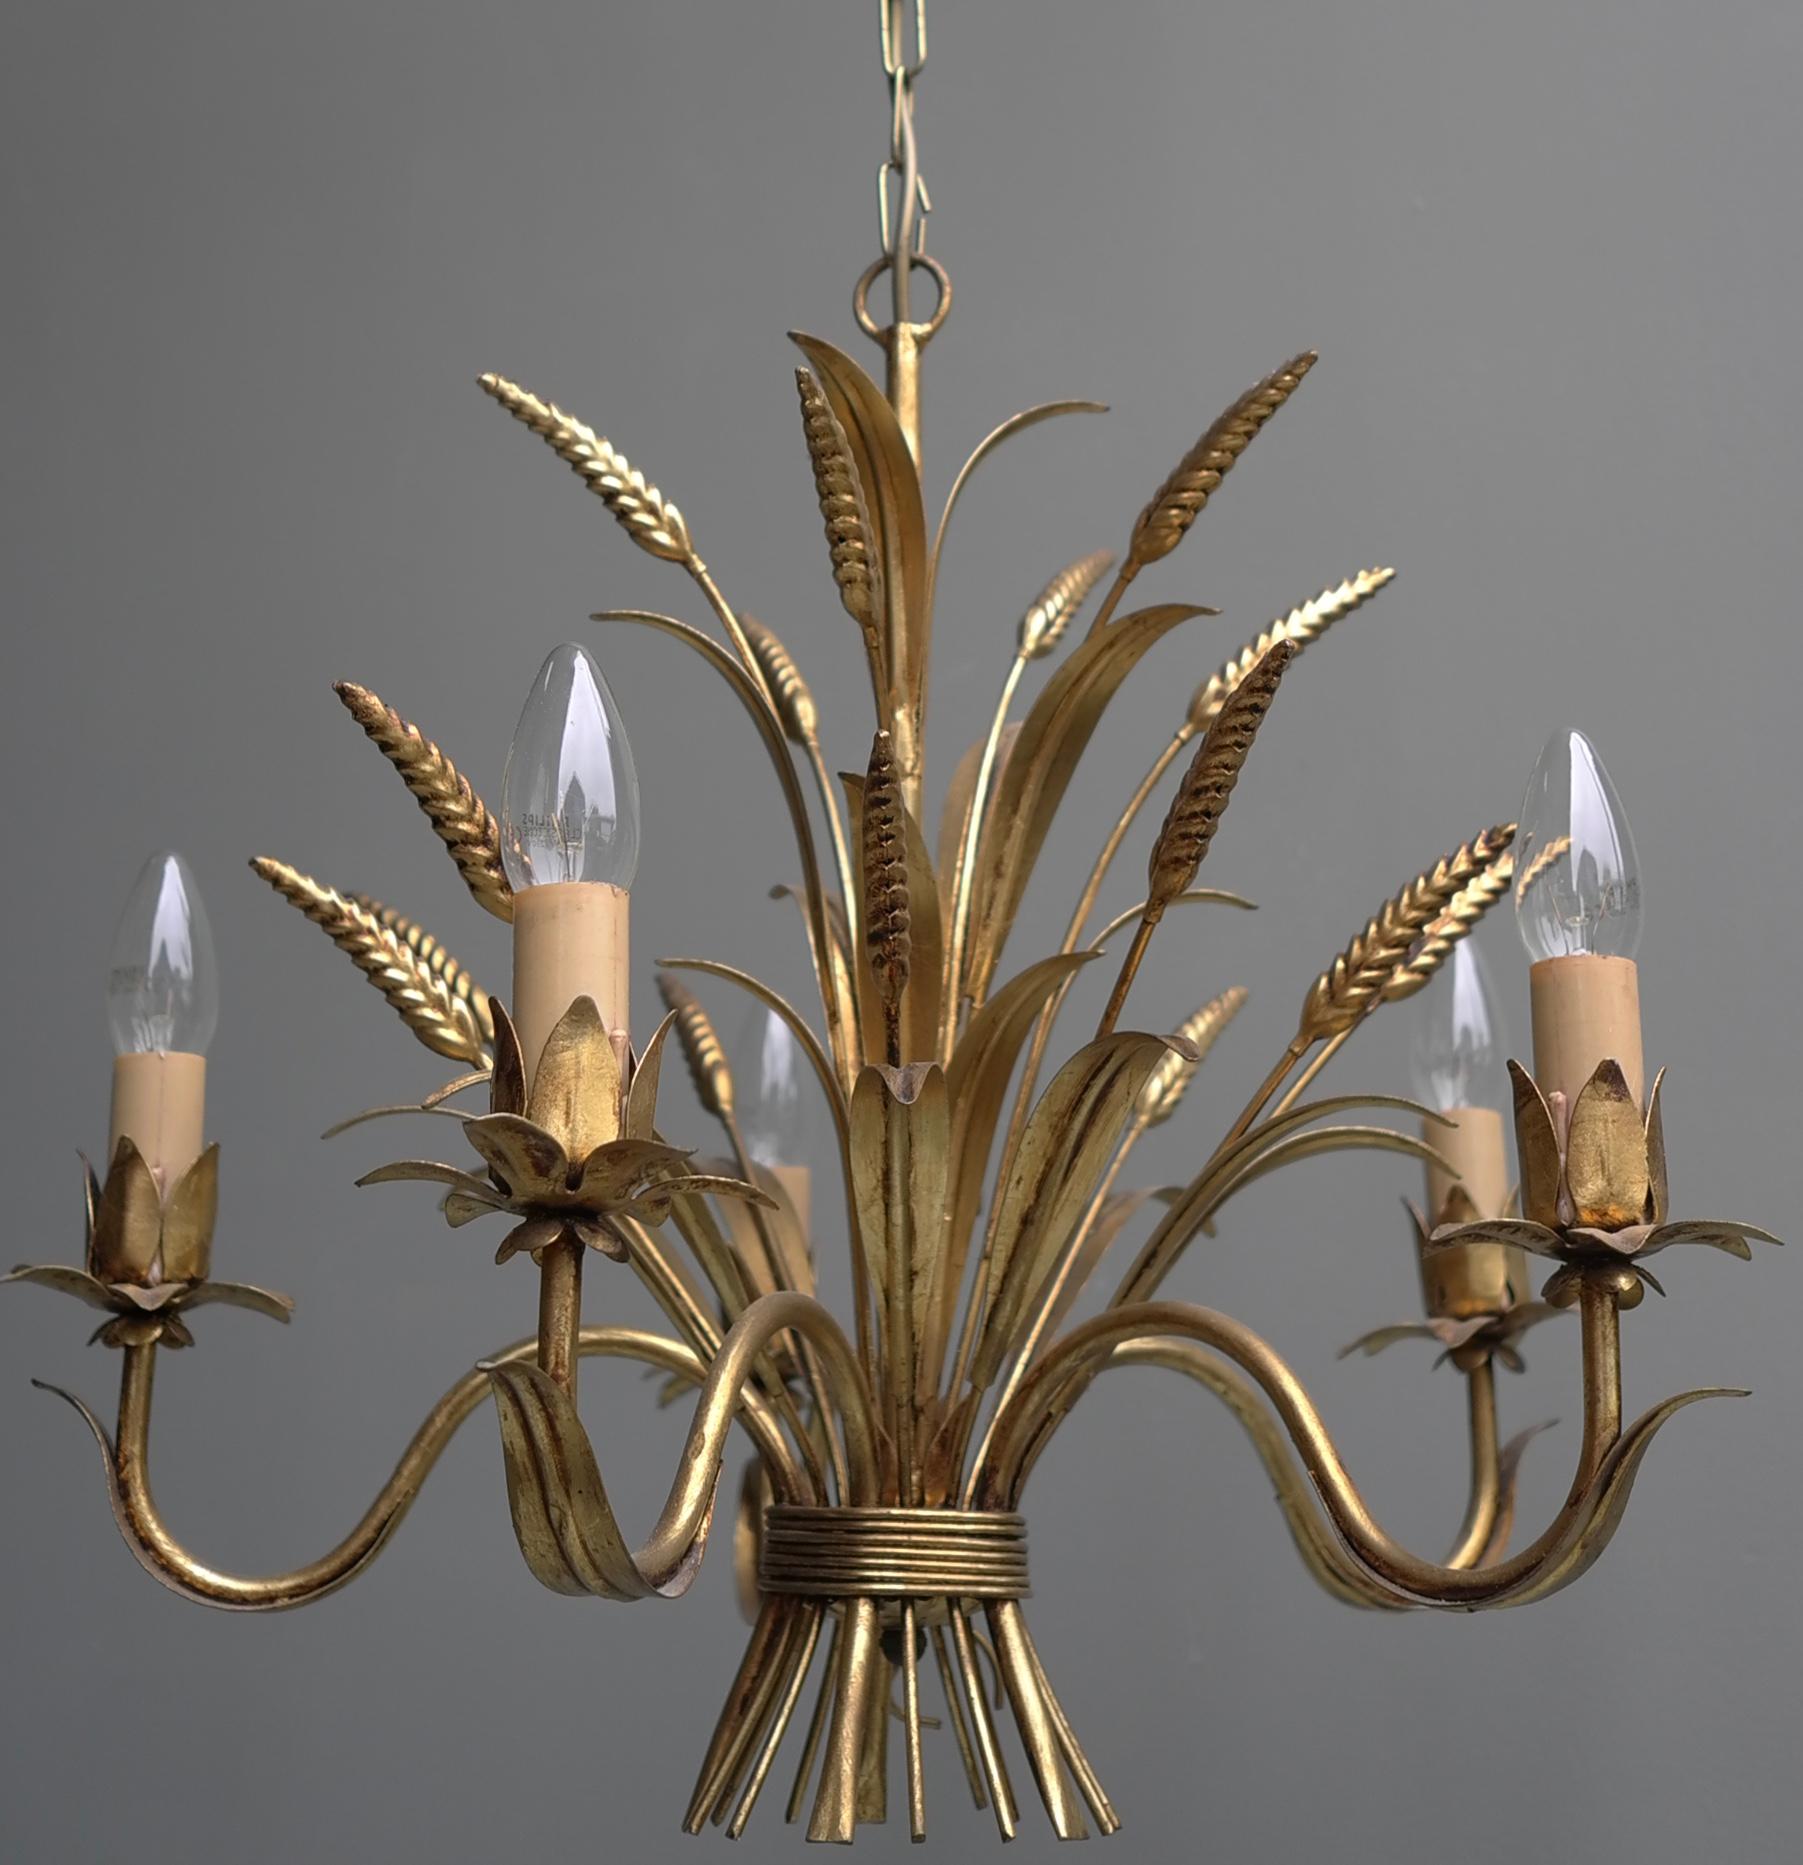 Wheat sheaf gold colored pendant lamp, France, 1960s. Adjustable in height.